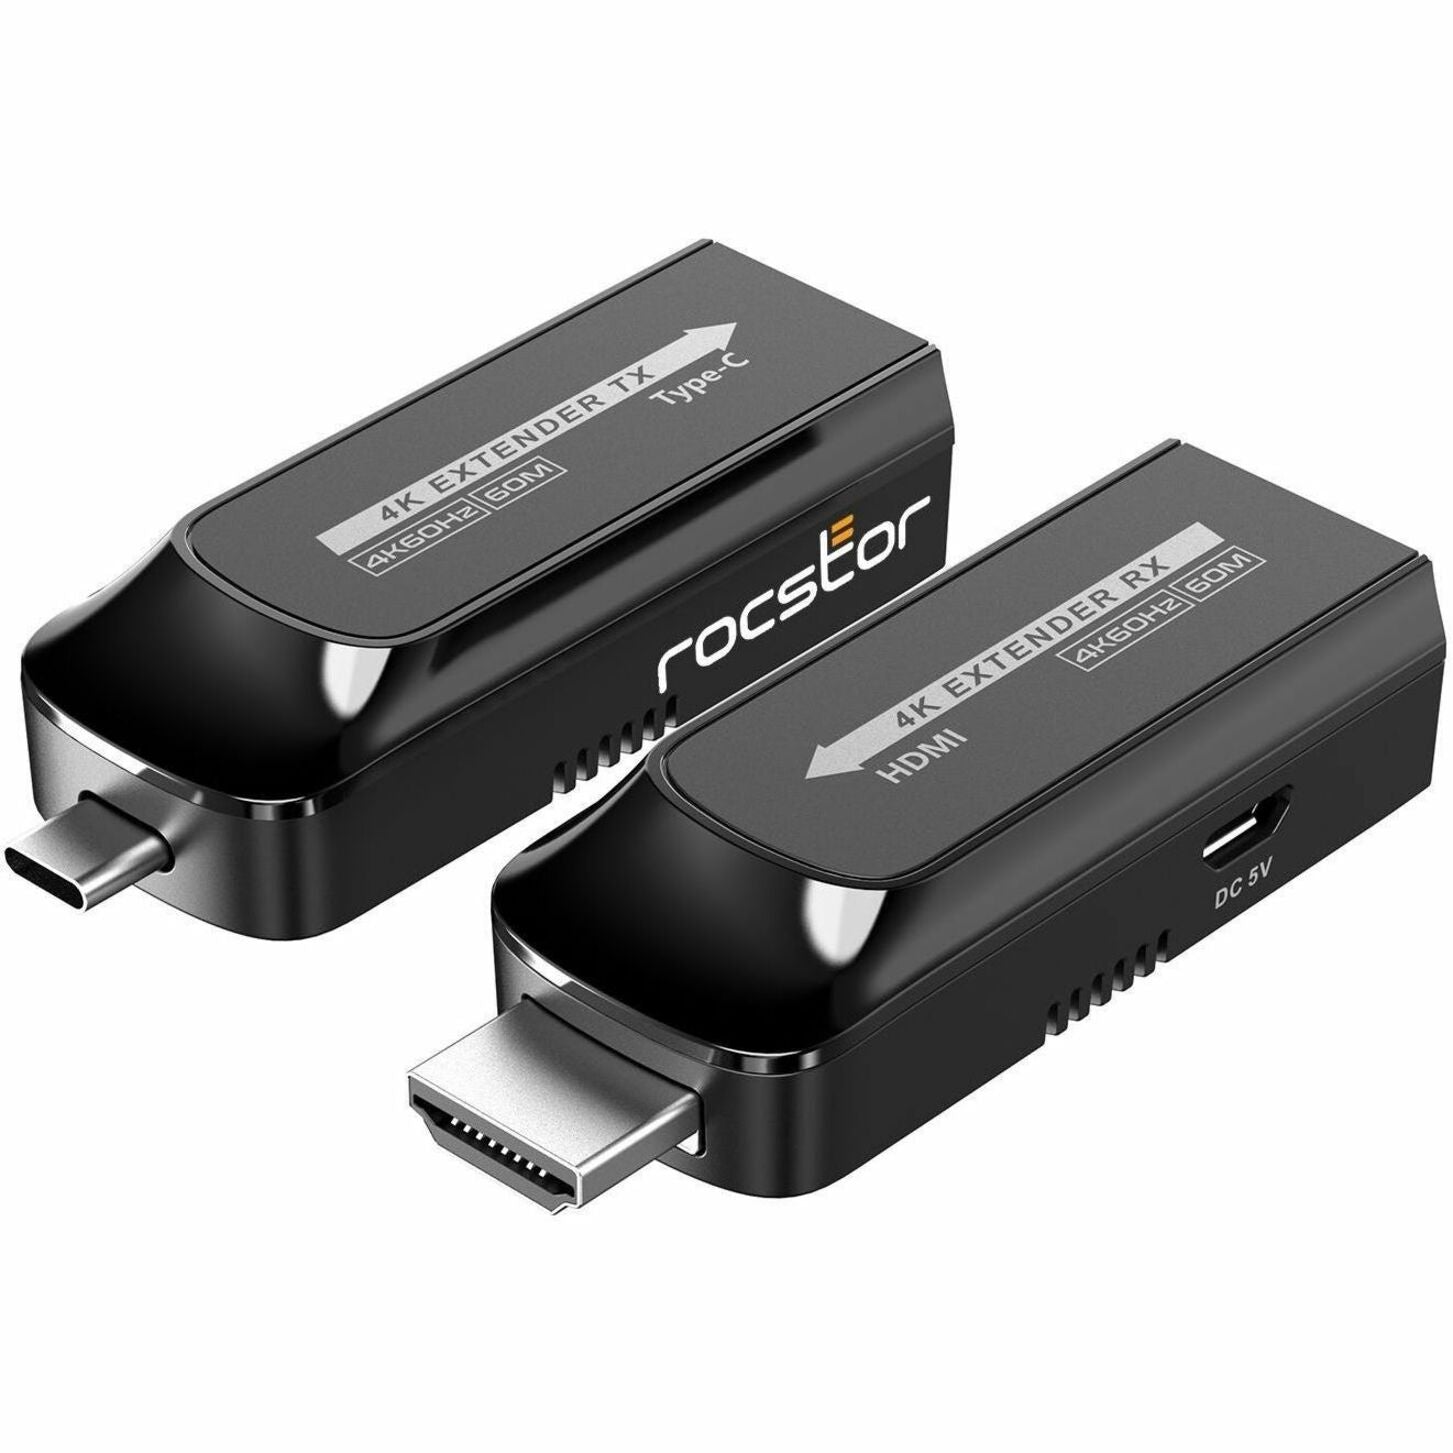 Rocstor Y10G007-B1 USB 3.1 Type-C to HDMI 2.0 Adapter, 4K Video Support, 2-Year Warranty